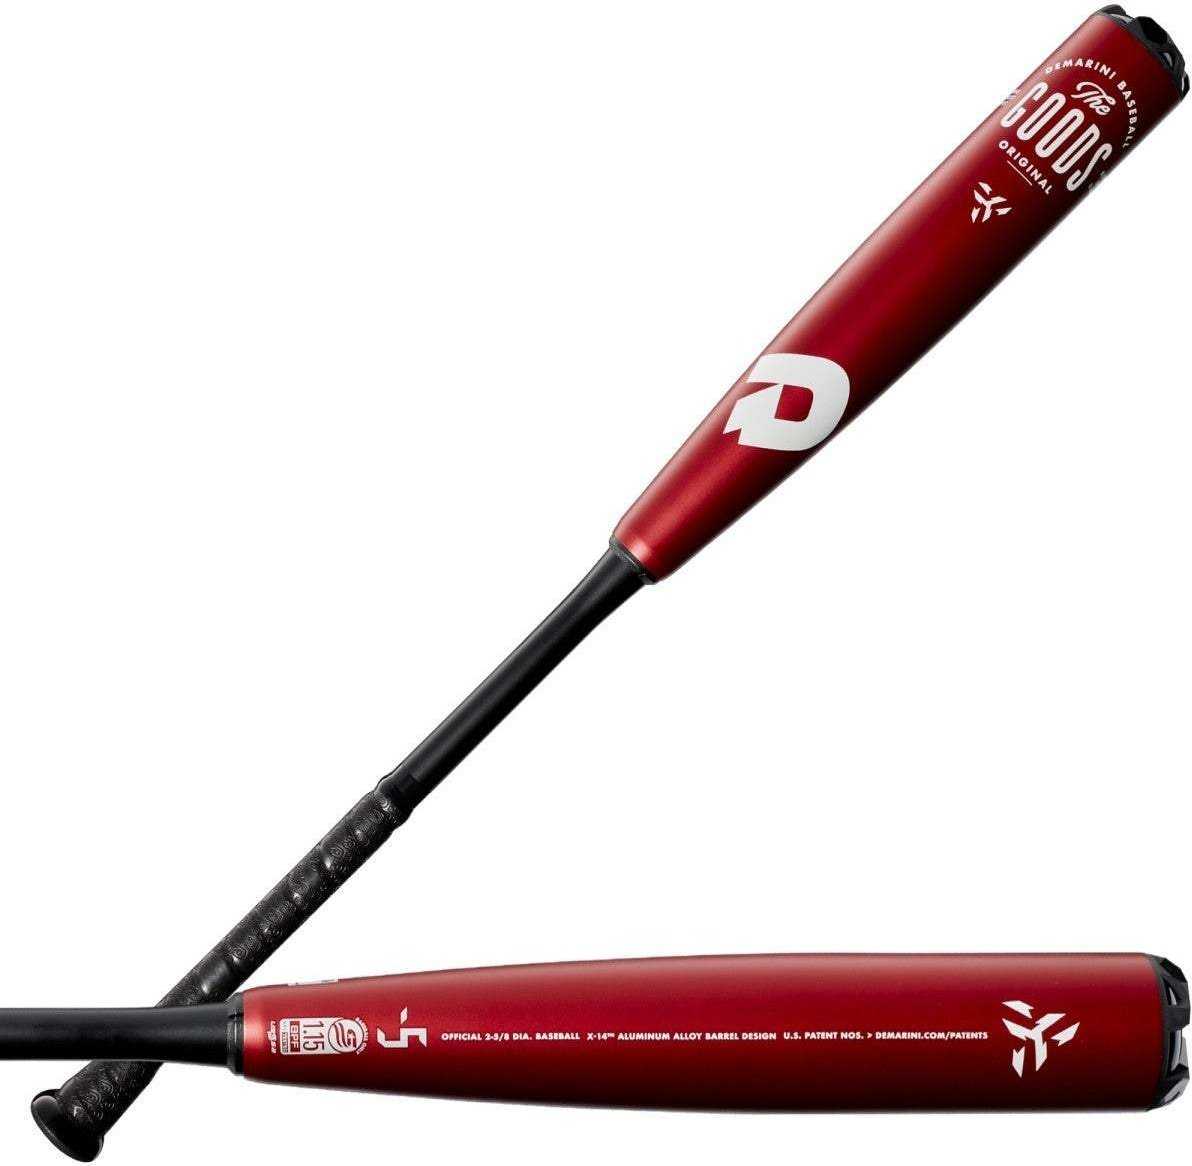 DeMarini 2021 The Goods (-5) USSSA Bat WTDXGB5-21 - Black Red Gold - HIT A Double